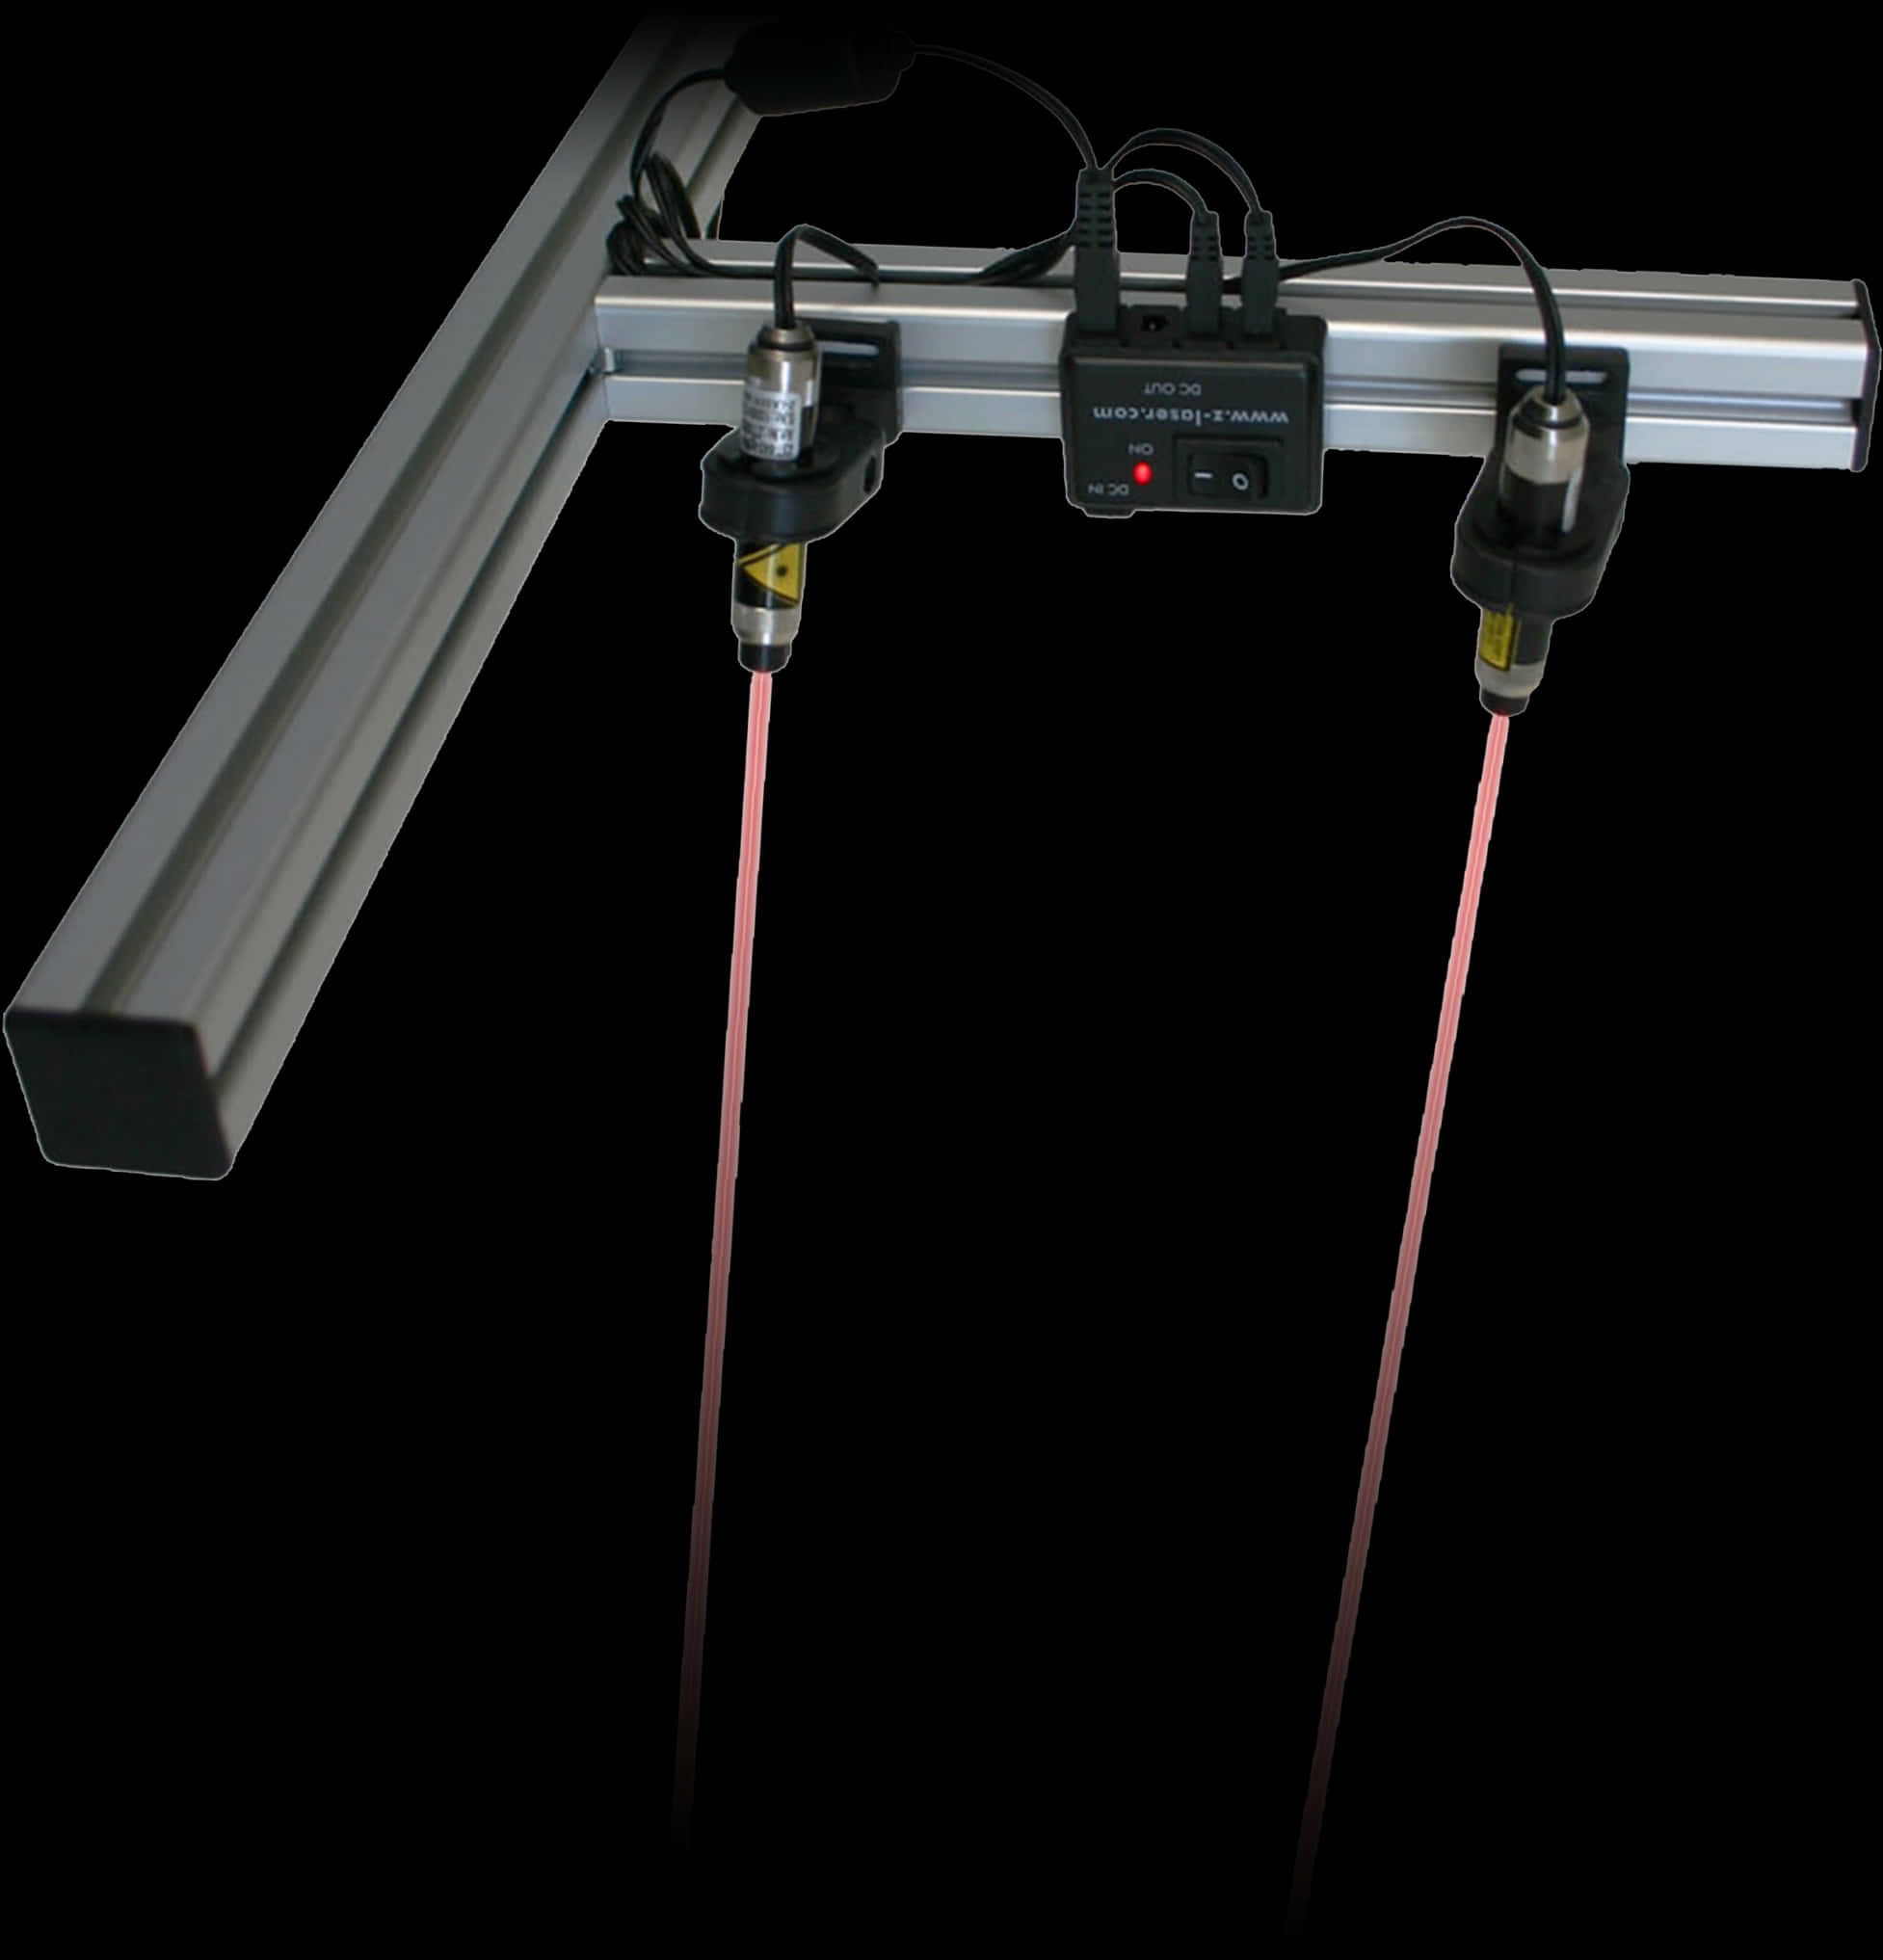 Industrial Laser Alignment Tool PNG